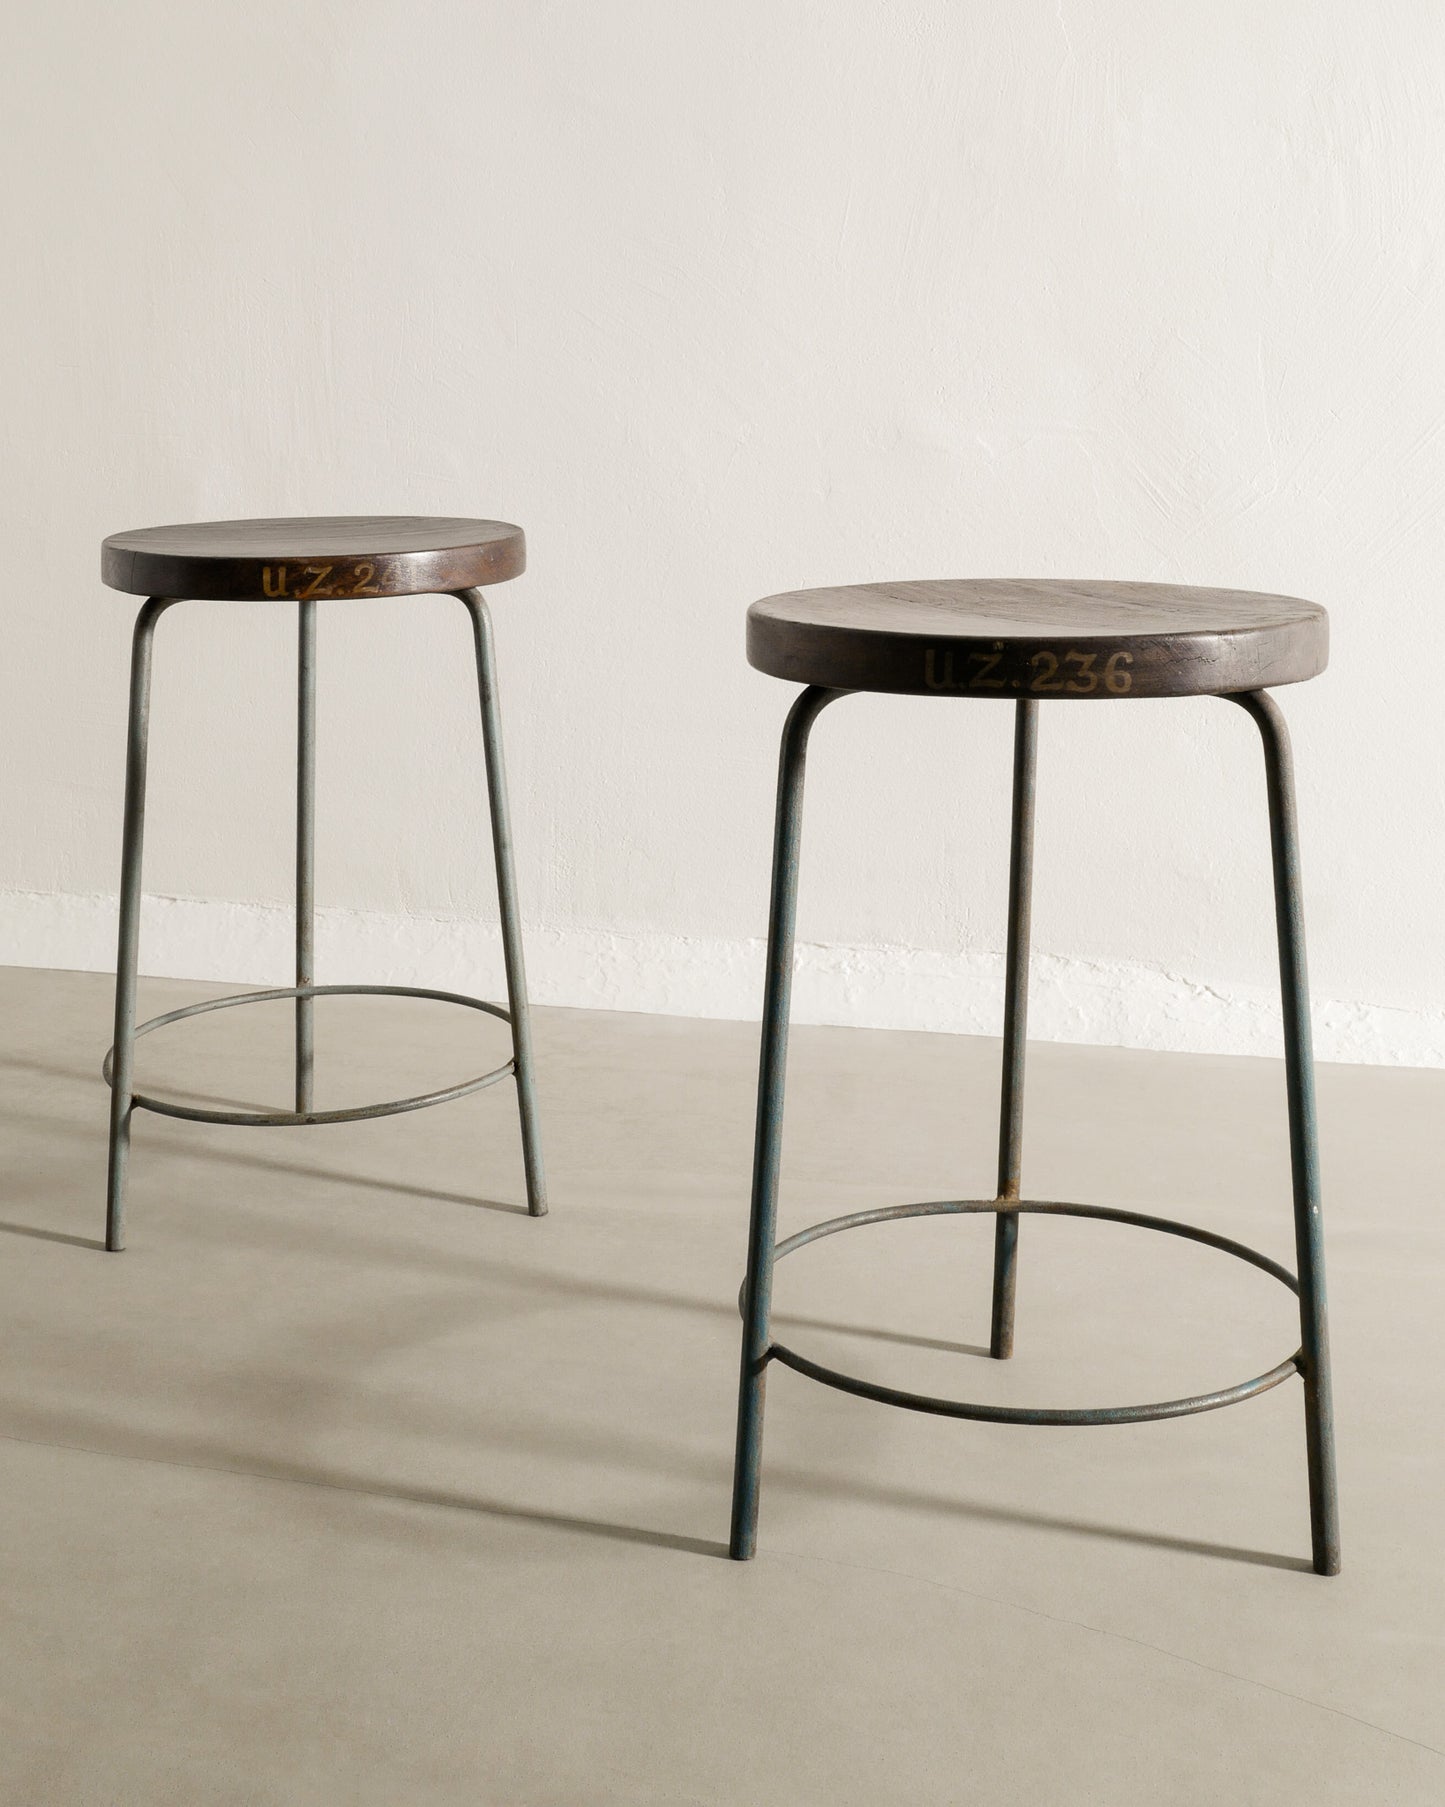 PAIR OF PIERRE JEANNERET HIGH STOOLS, 1950s